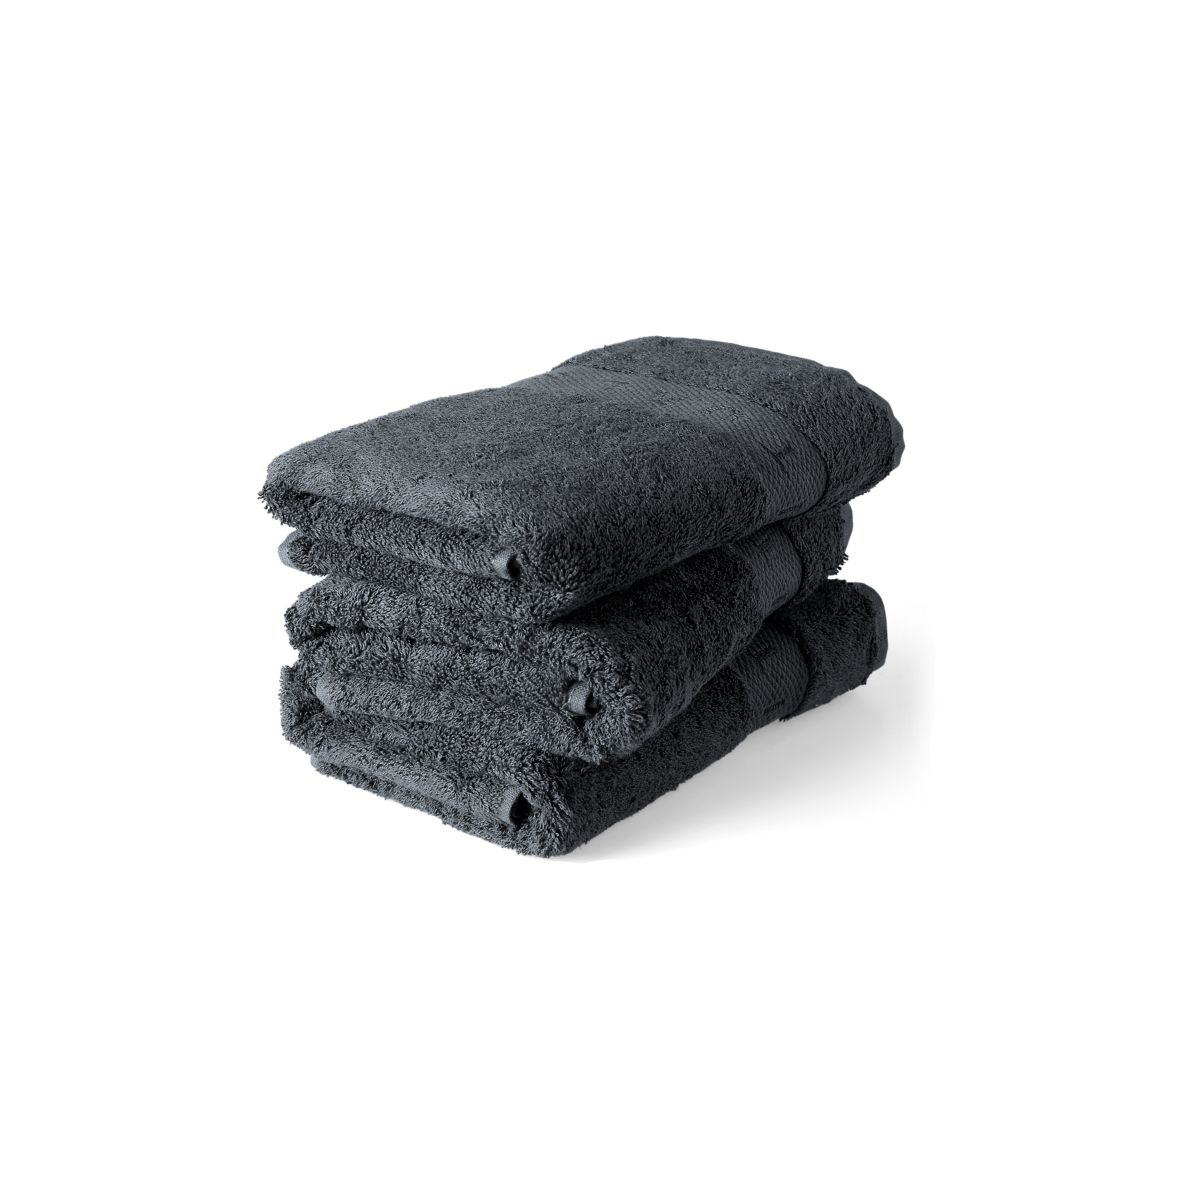 Rituals Super Smooth Cotton Hand Towel 50x100cm Charcoal Grey